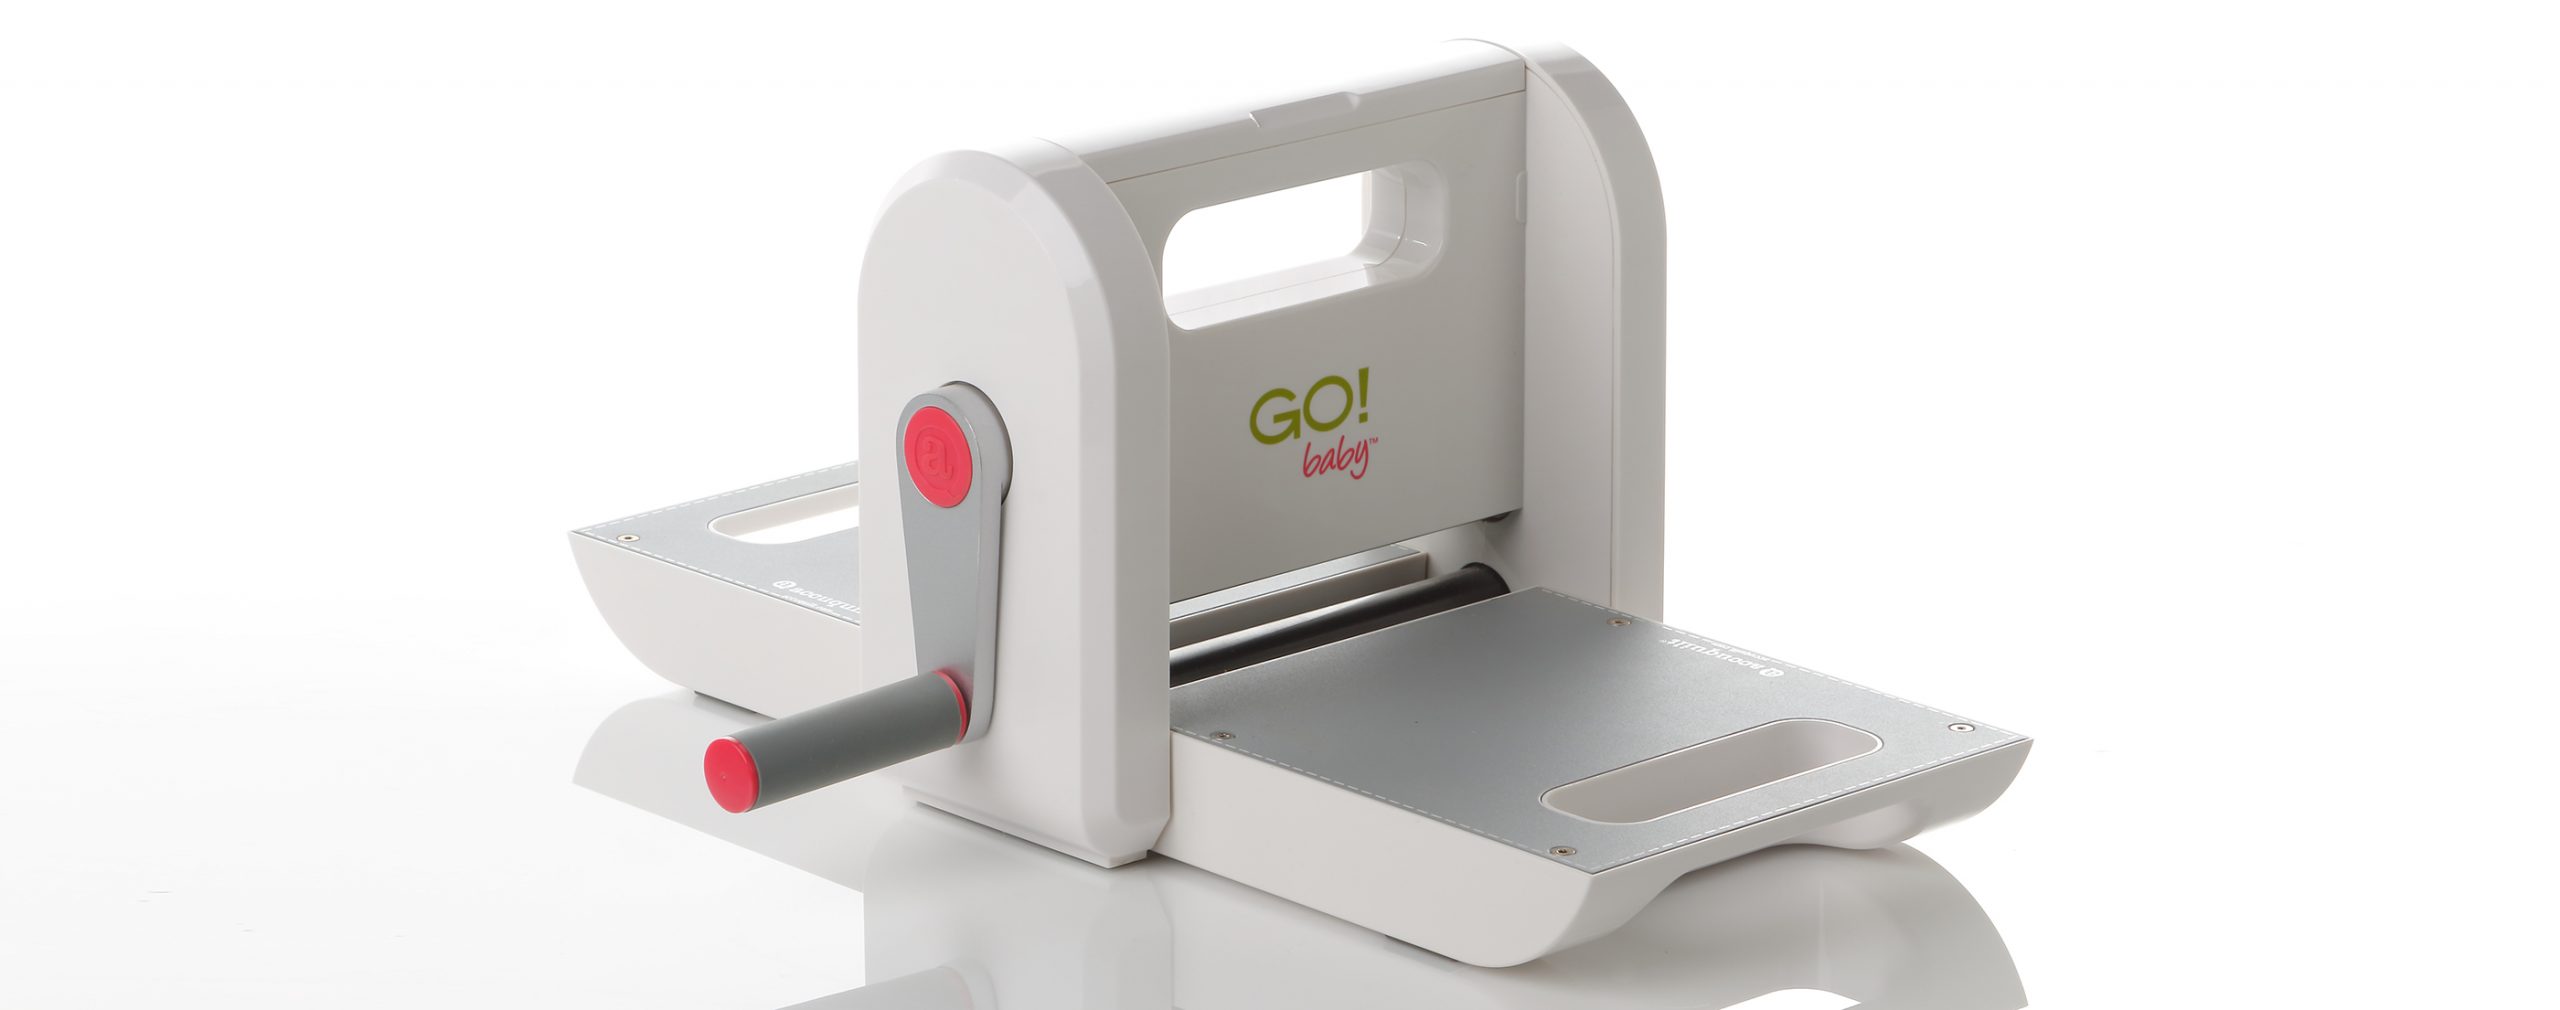 The AccuQuilt Go! baby, a small die cutting fabric cutter, with the cutting tray open.